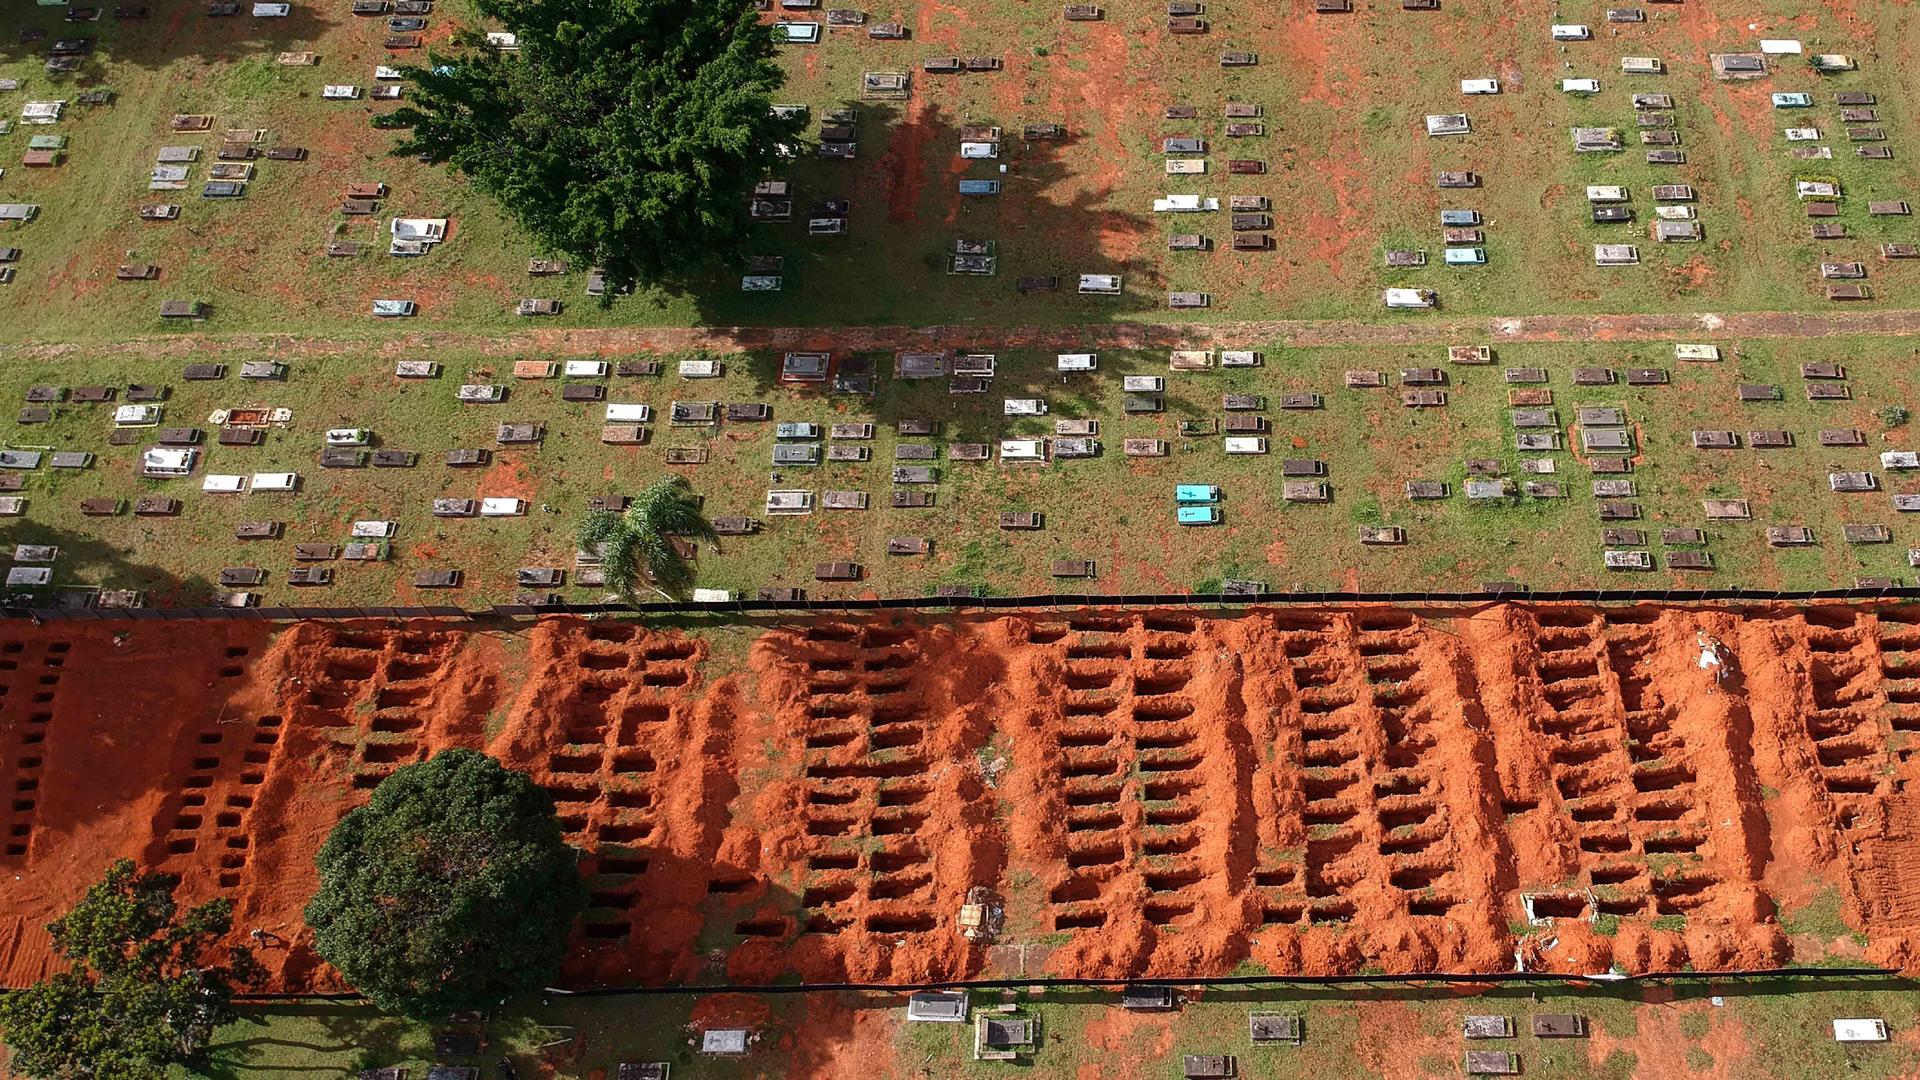 A cemetery is shown via an ariel view with several rows of empty new graves and exposed dirt.